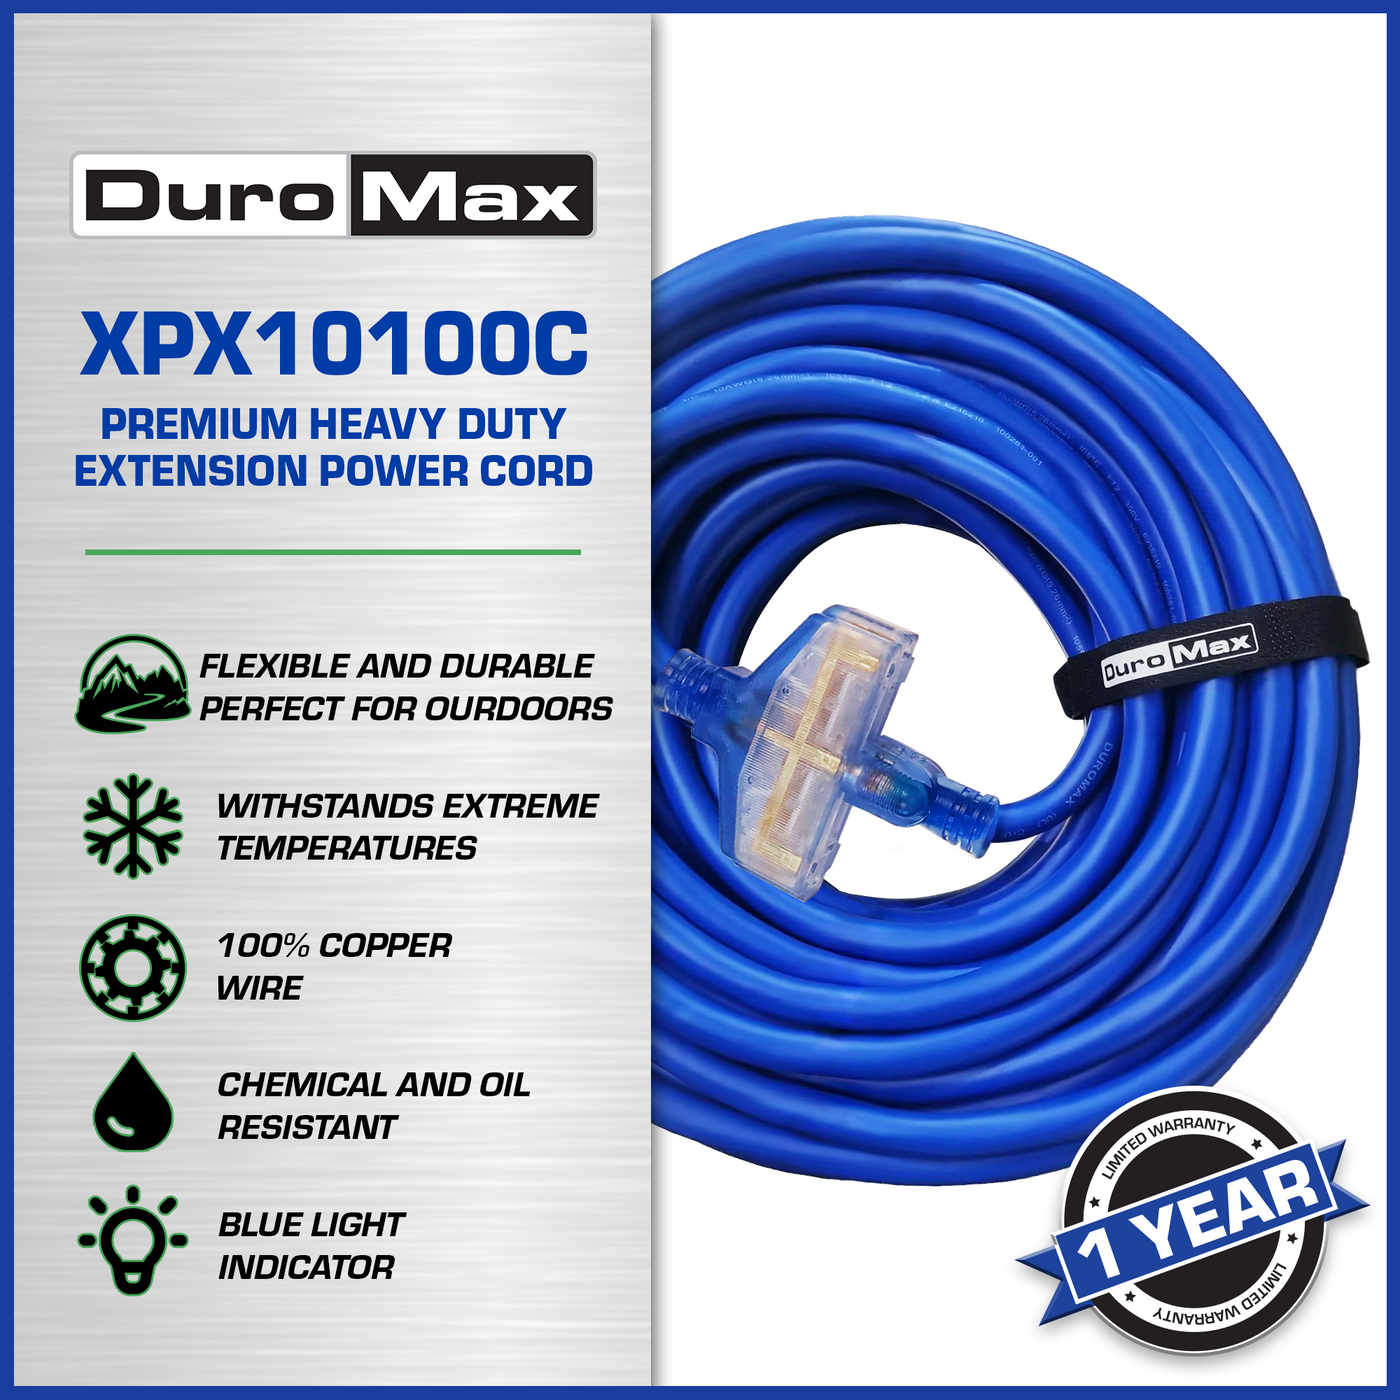 DuroMax  DuroMax XPX10100C Heavy Duty SJEOOW 100-Foot 10 Gauge Blue Triple Tap Extension Power Cord